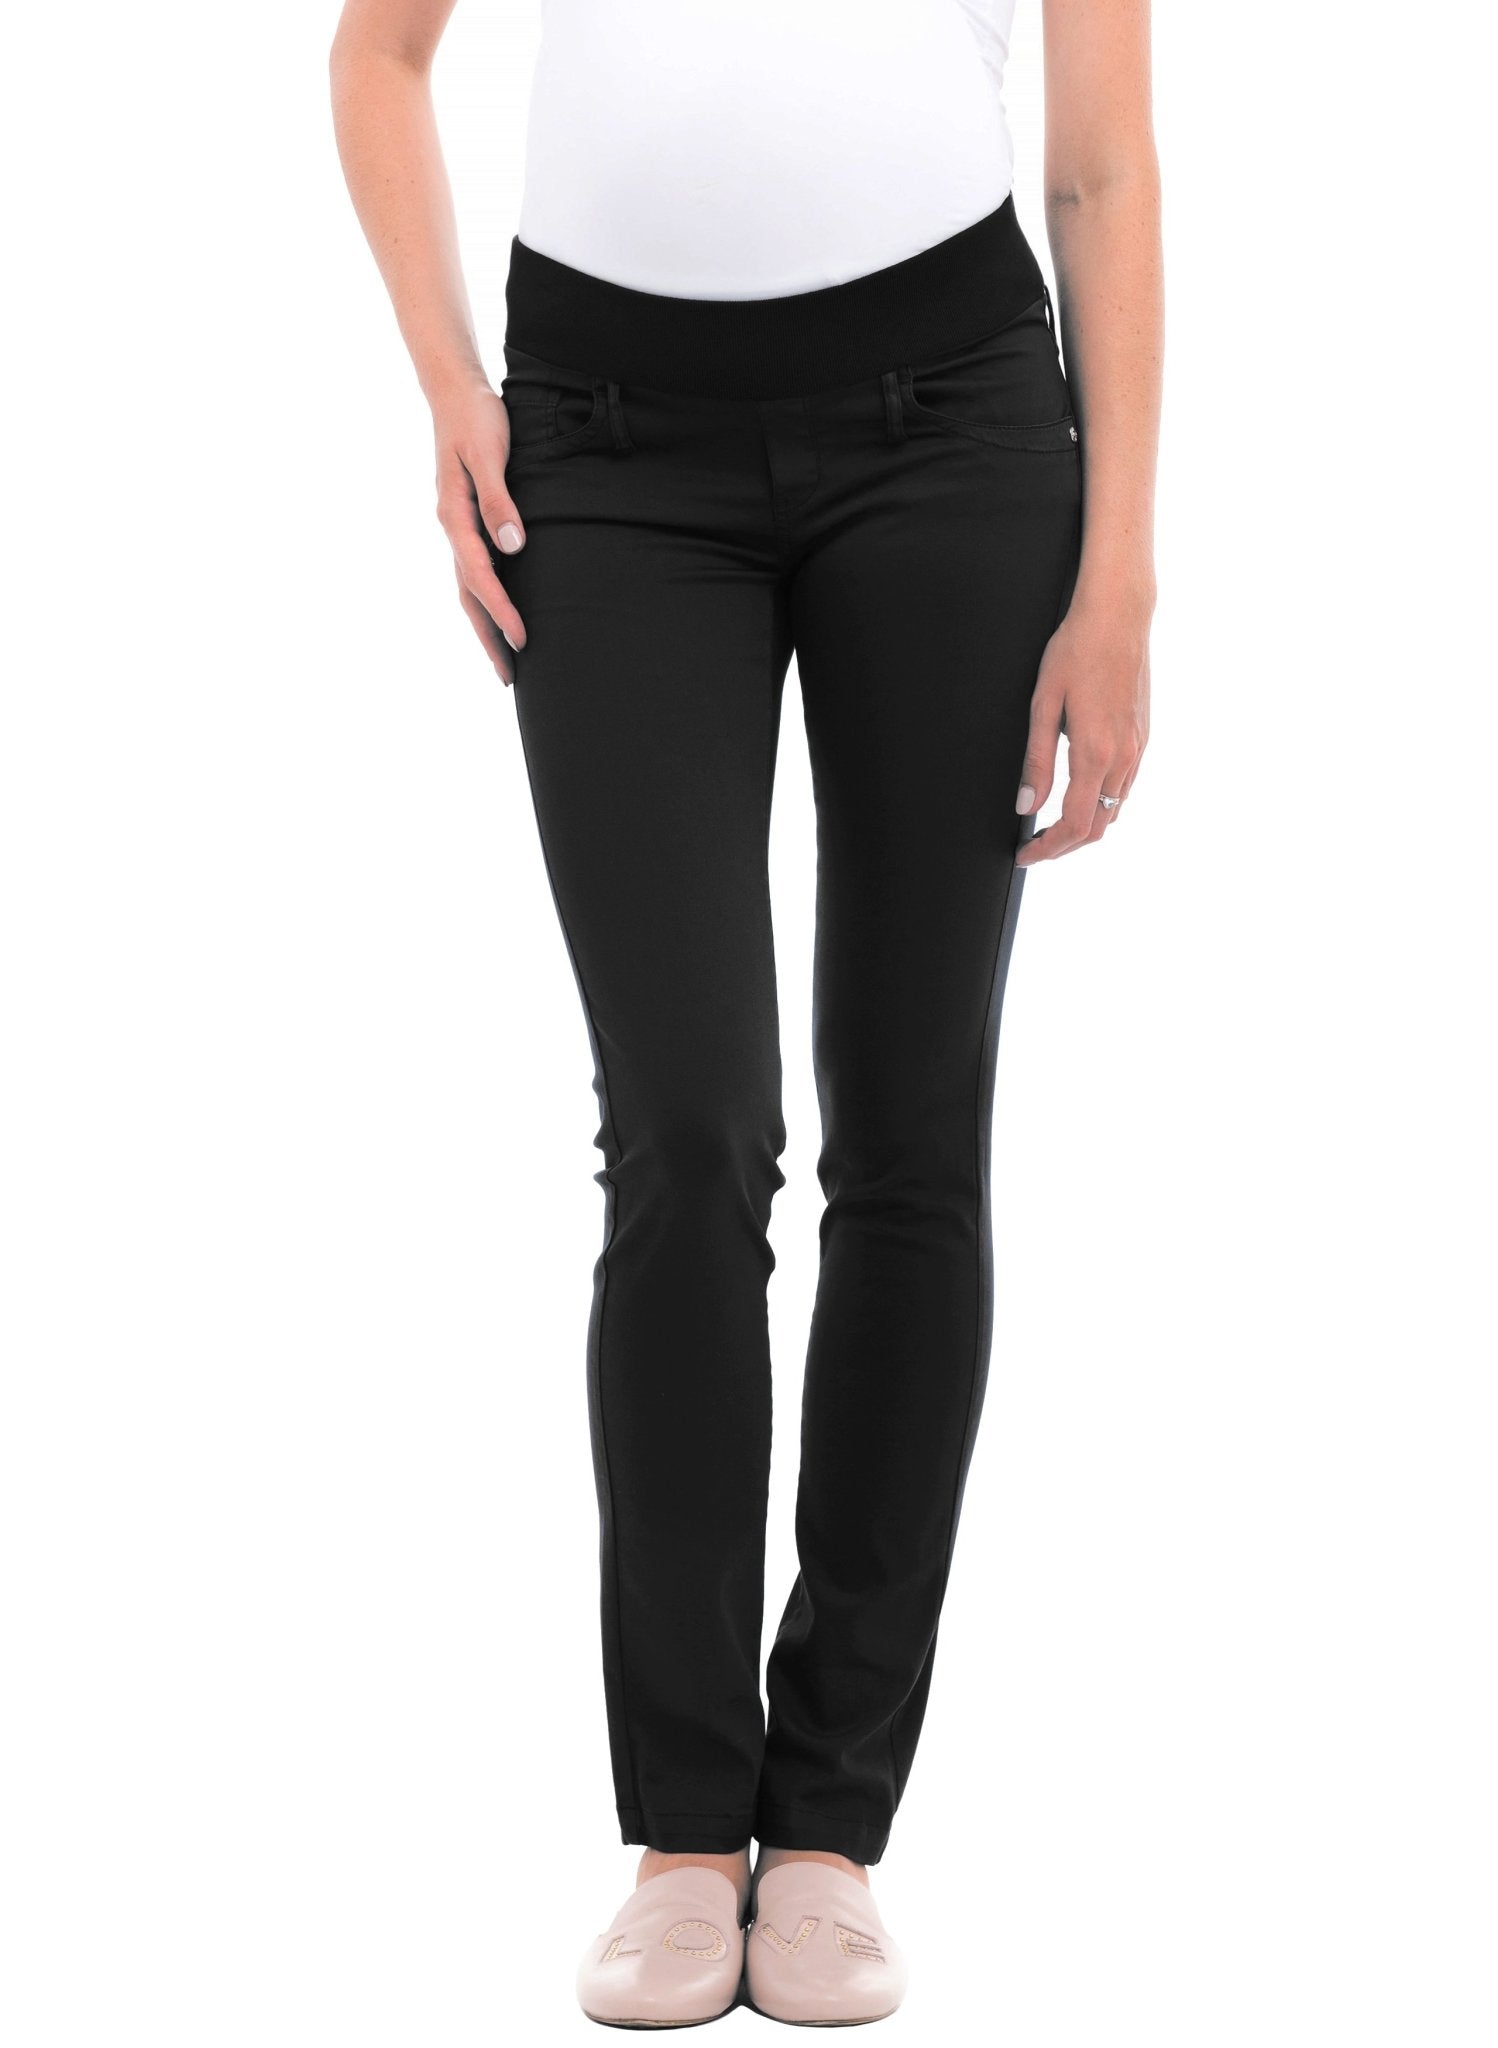 Cotton Skinny Maternity Pants - Black - Mums and Bumps